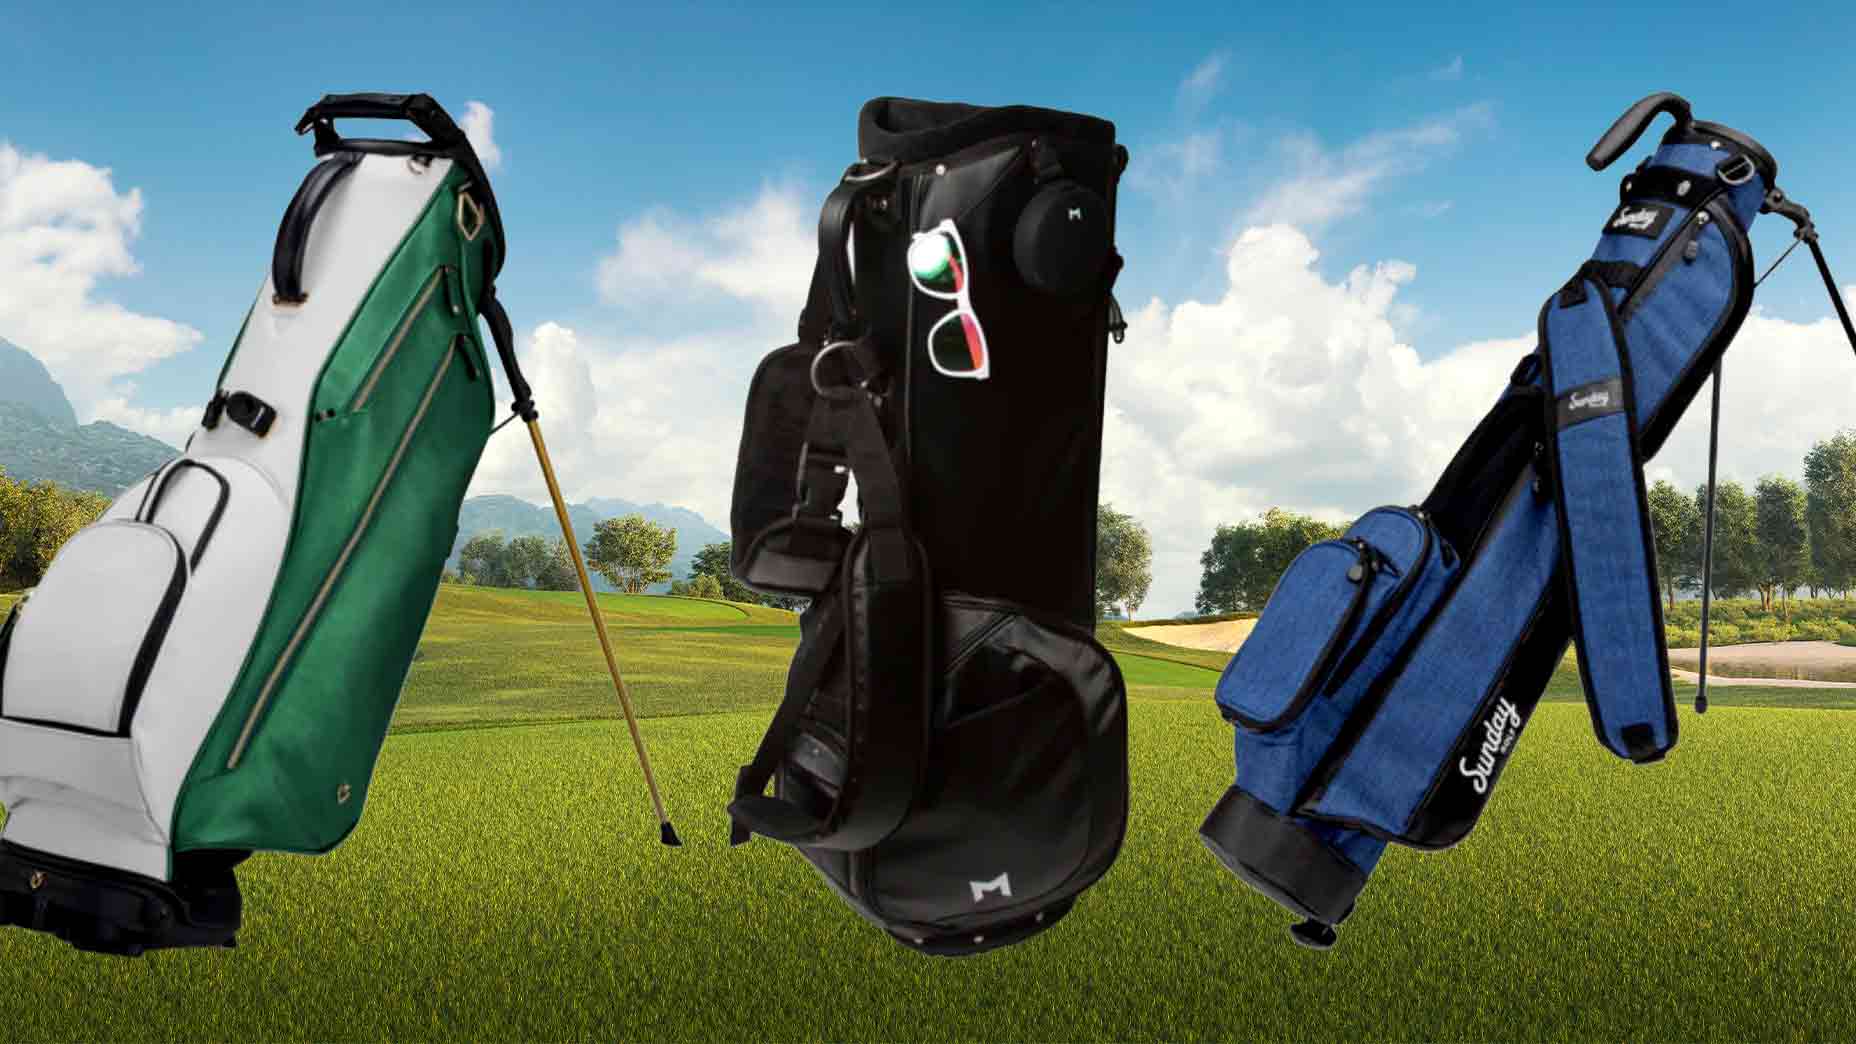 Shop these best-selling golf bags from Fairway Jockey